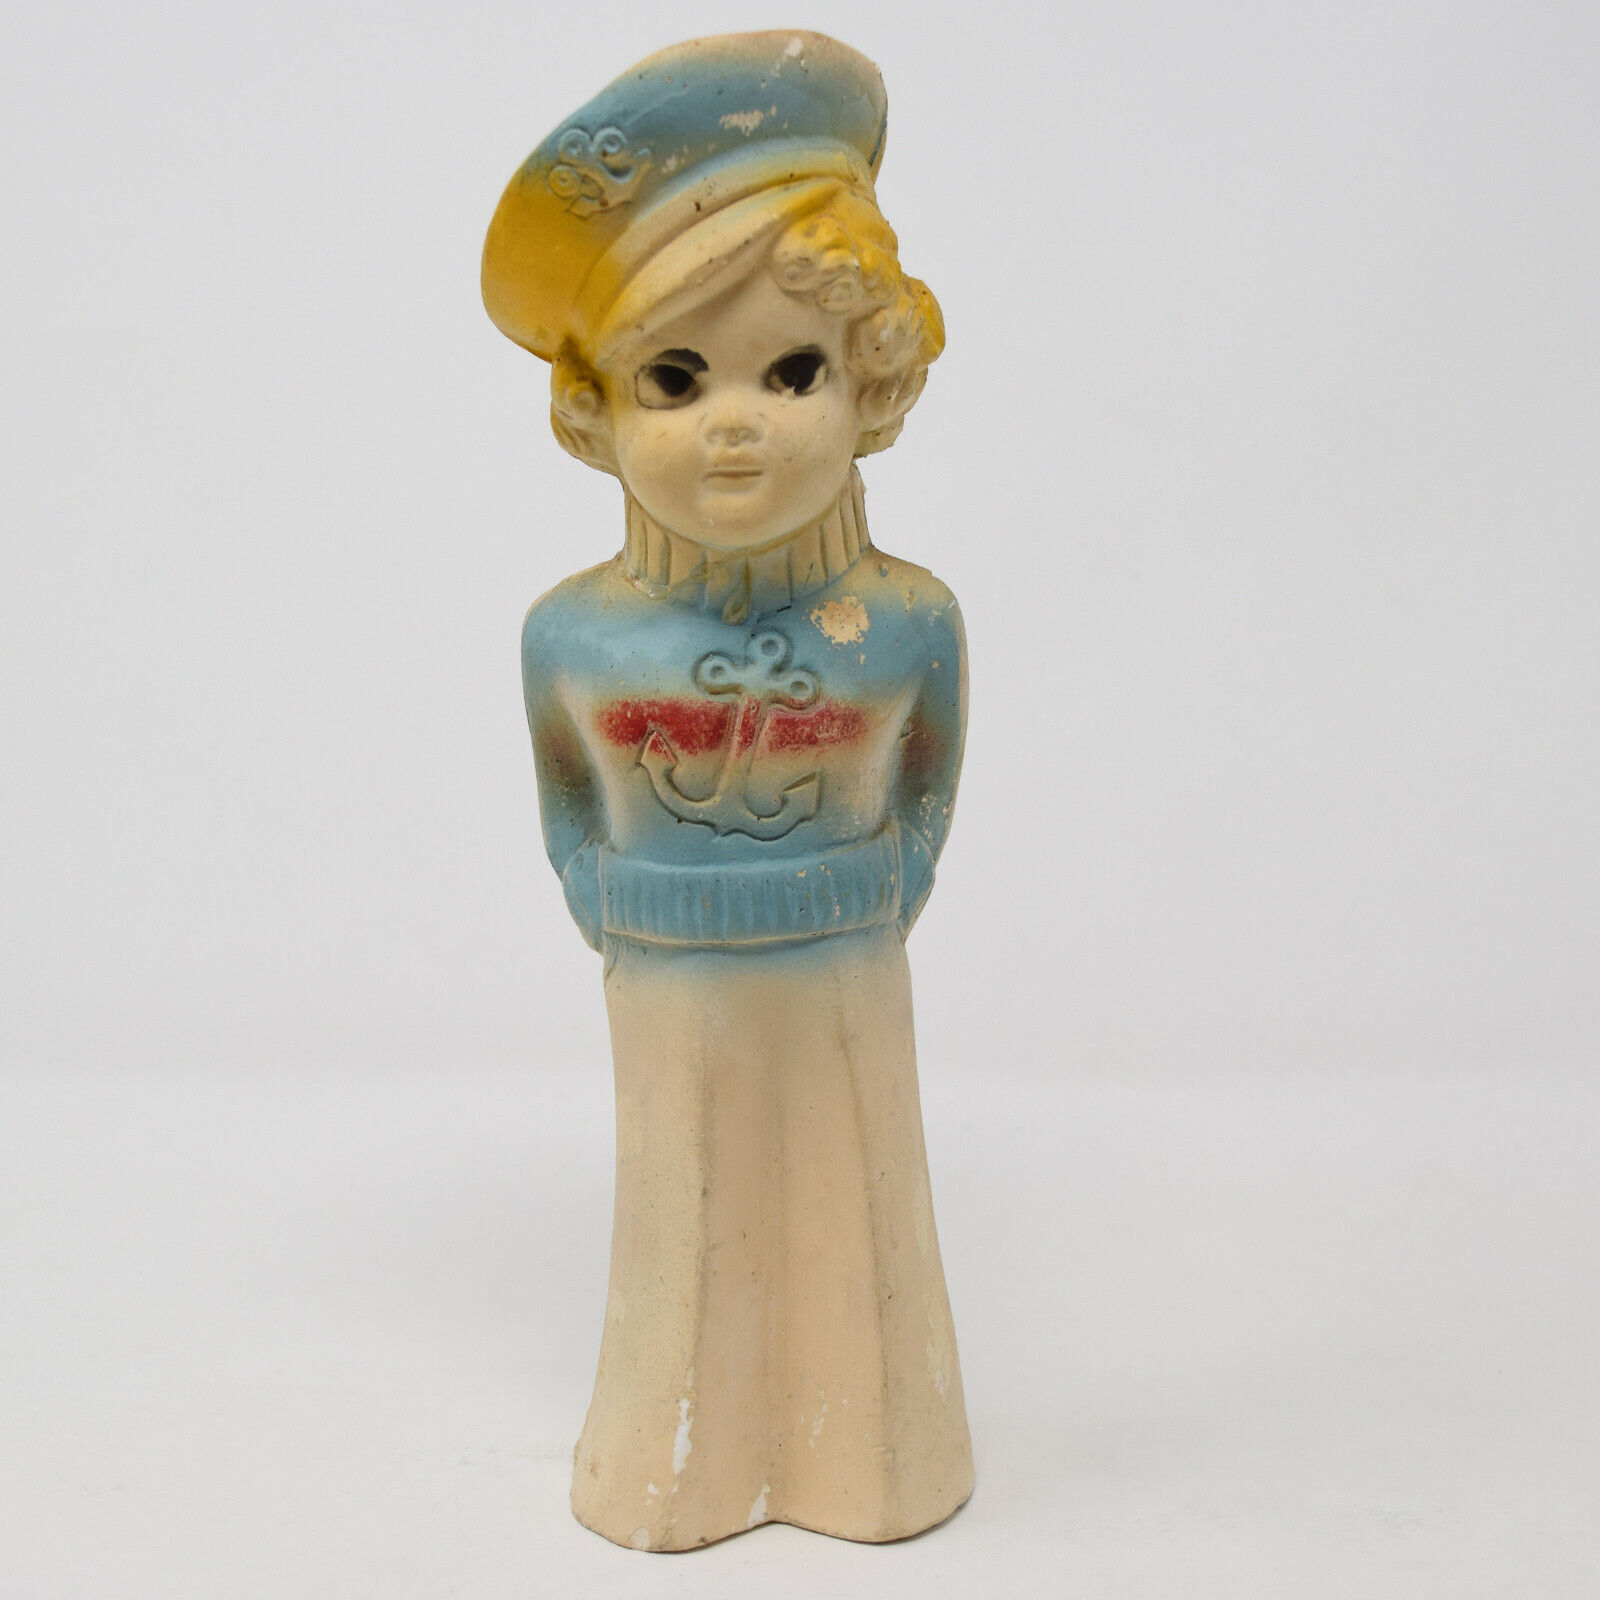 Vintage Shirley Temple Chalkware 1930s Carnival Fair Prize Repaired 3D Sailor